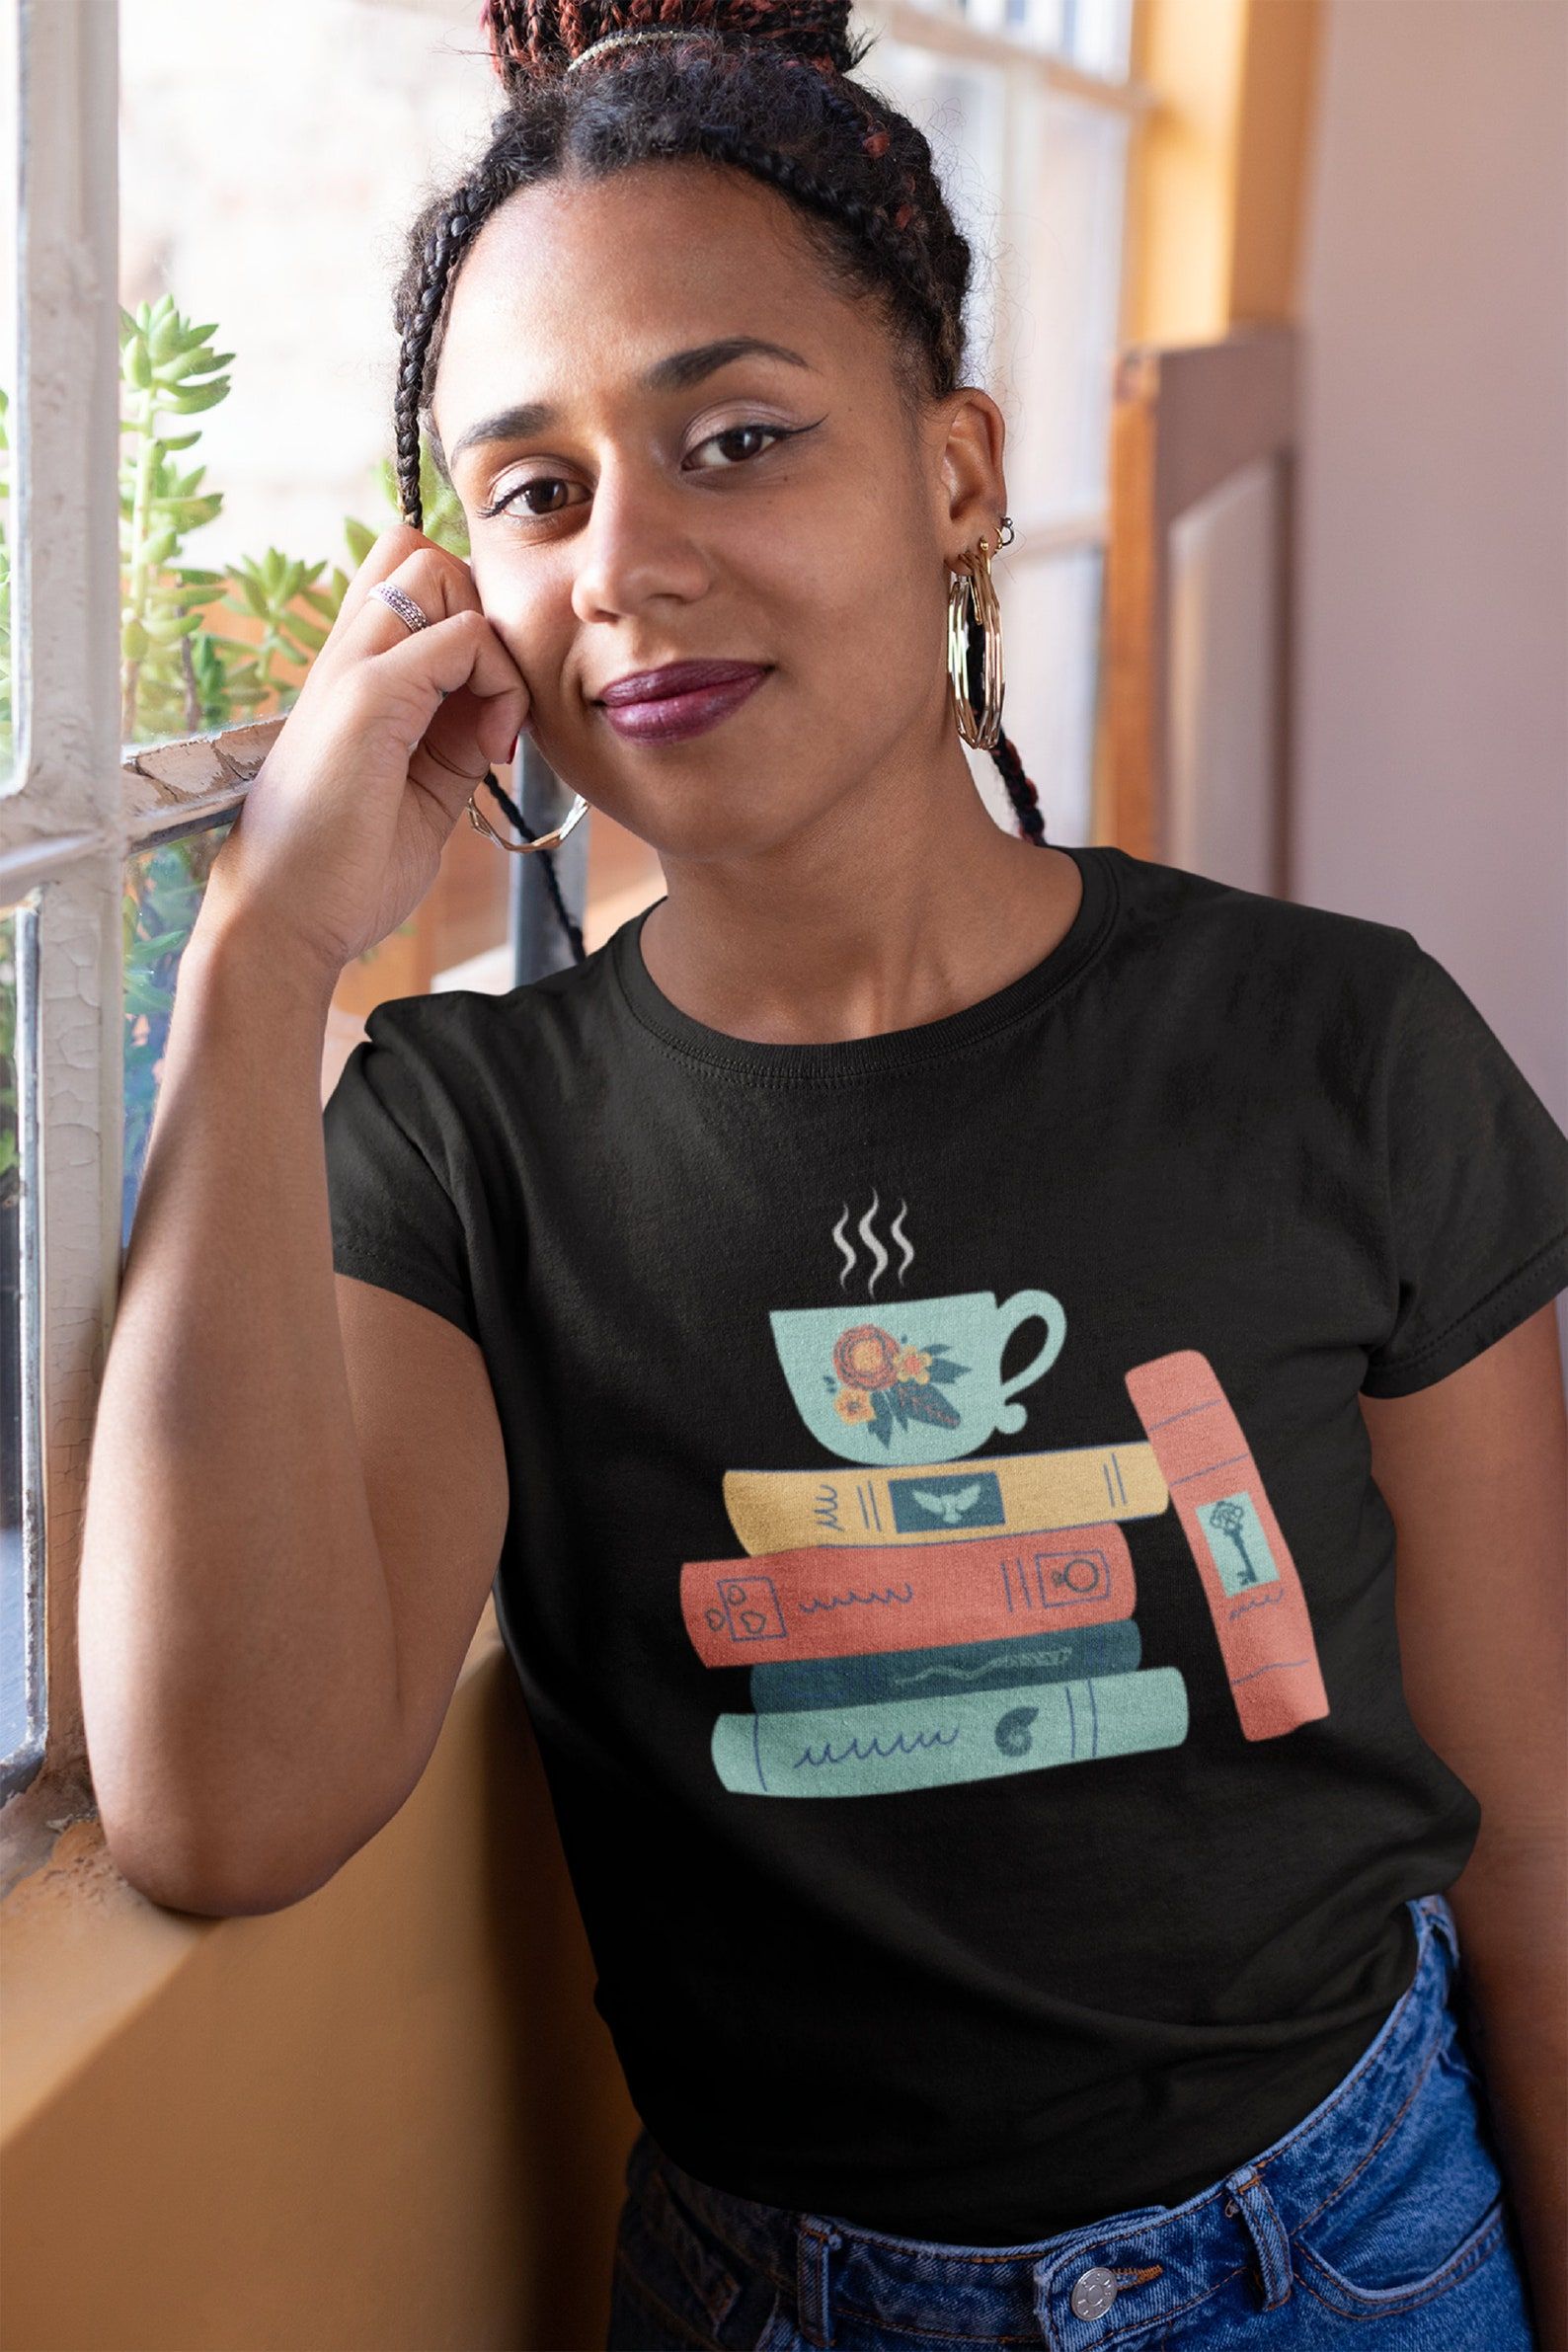 Image of a Black woman wearing a black t-shirt. The shirt has a green tea cup on top of four books in yellow, orange, and green. There is a fifth book leaning against the stack. 